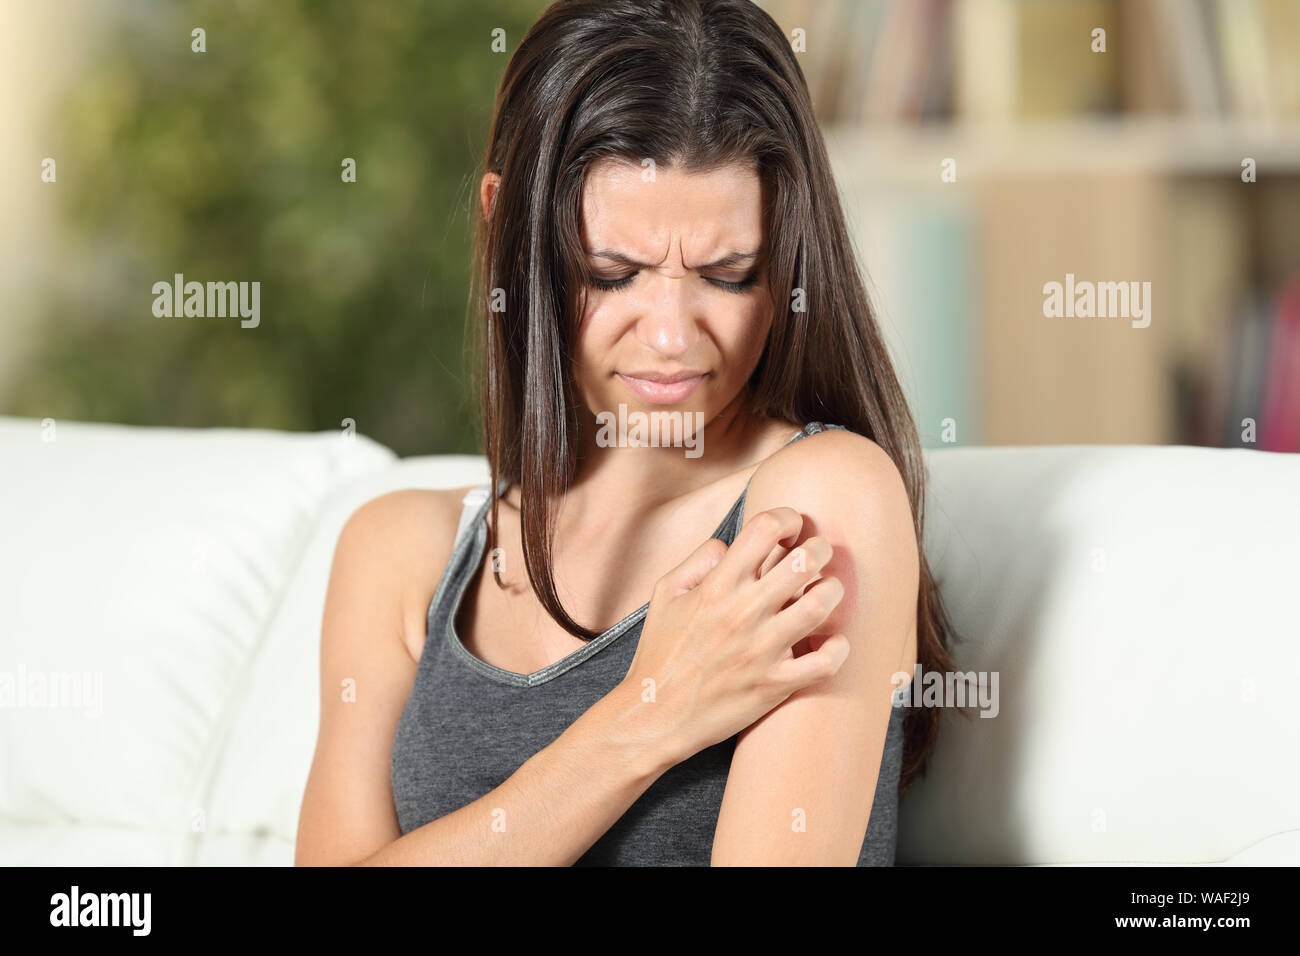 Girl suffering skin irritation scratching arm sitting on a couch in the living room at home Stock Photo